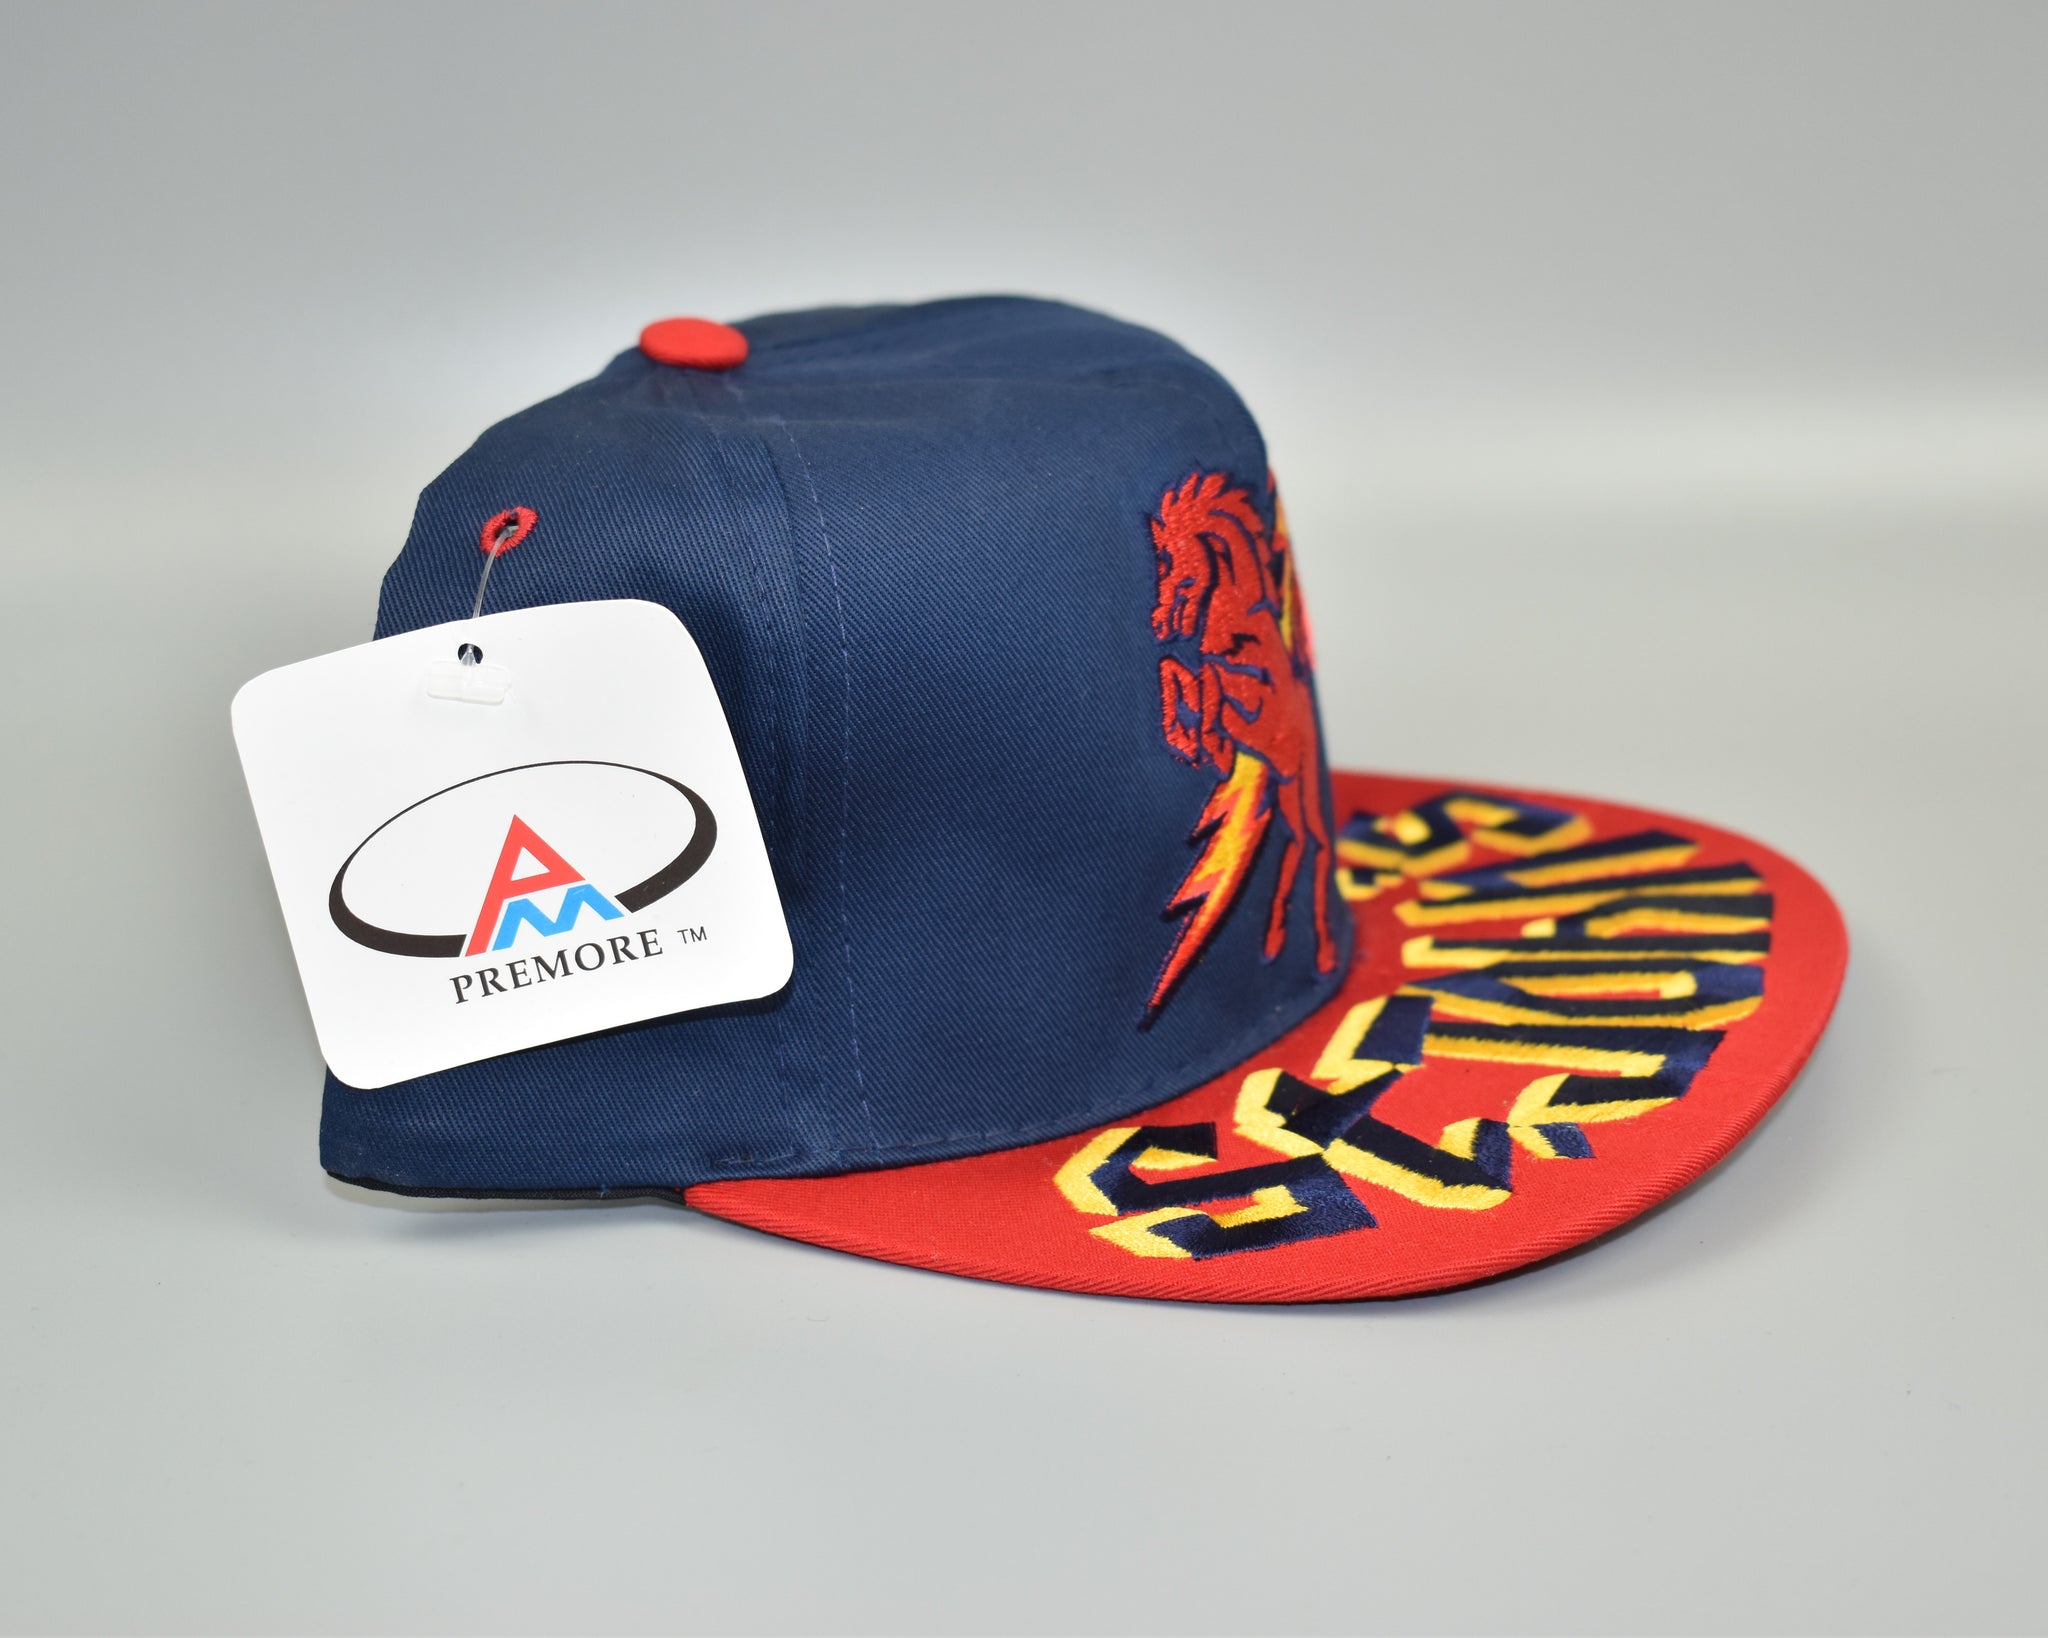 ICO Red Throwback Hat